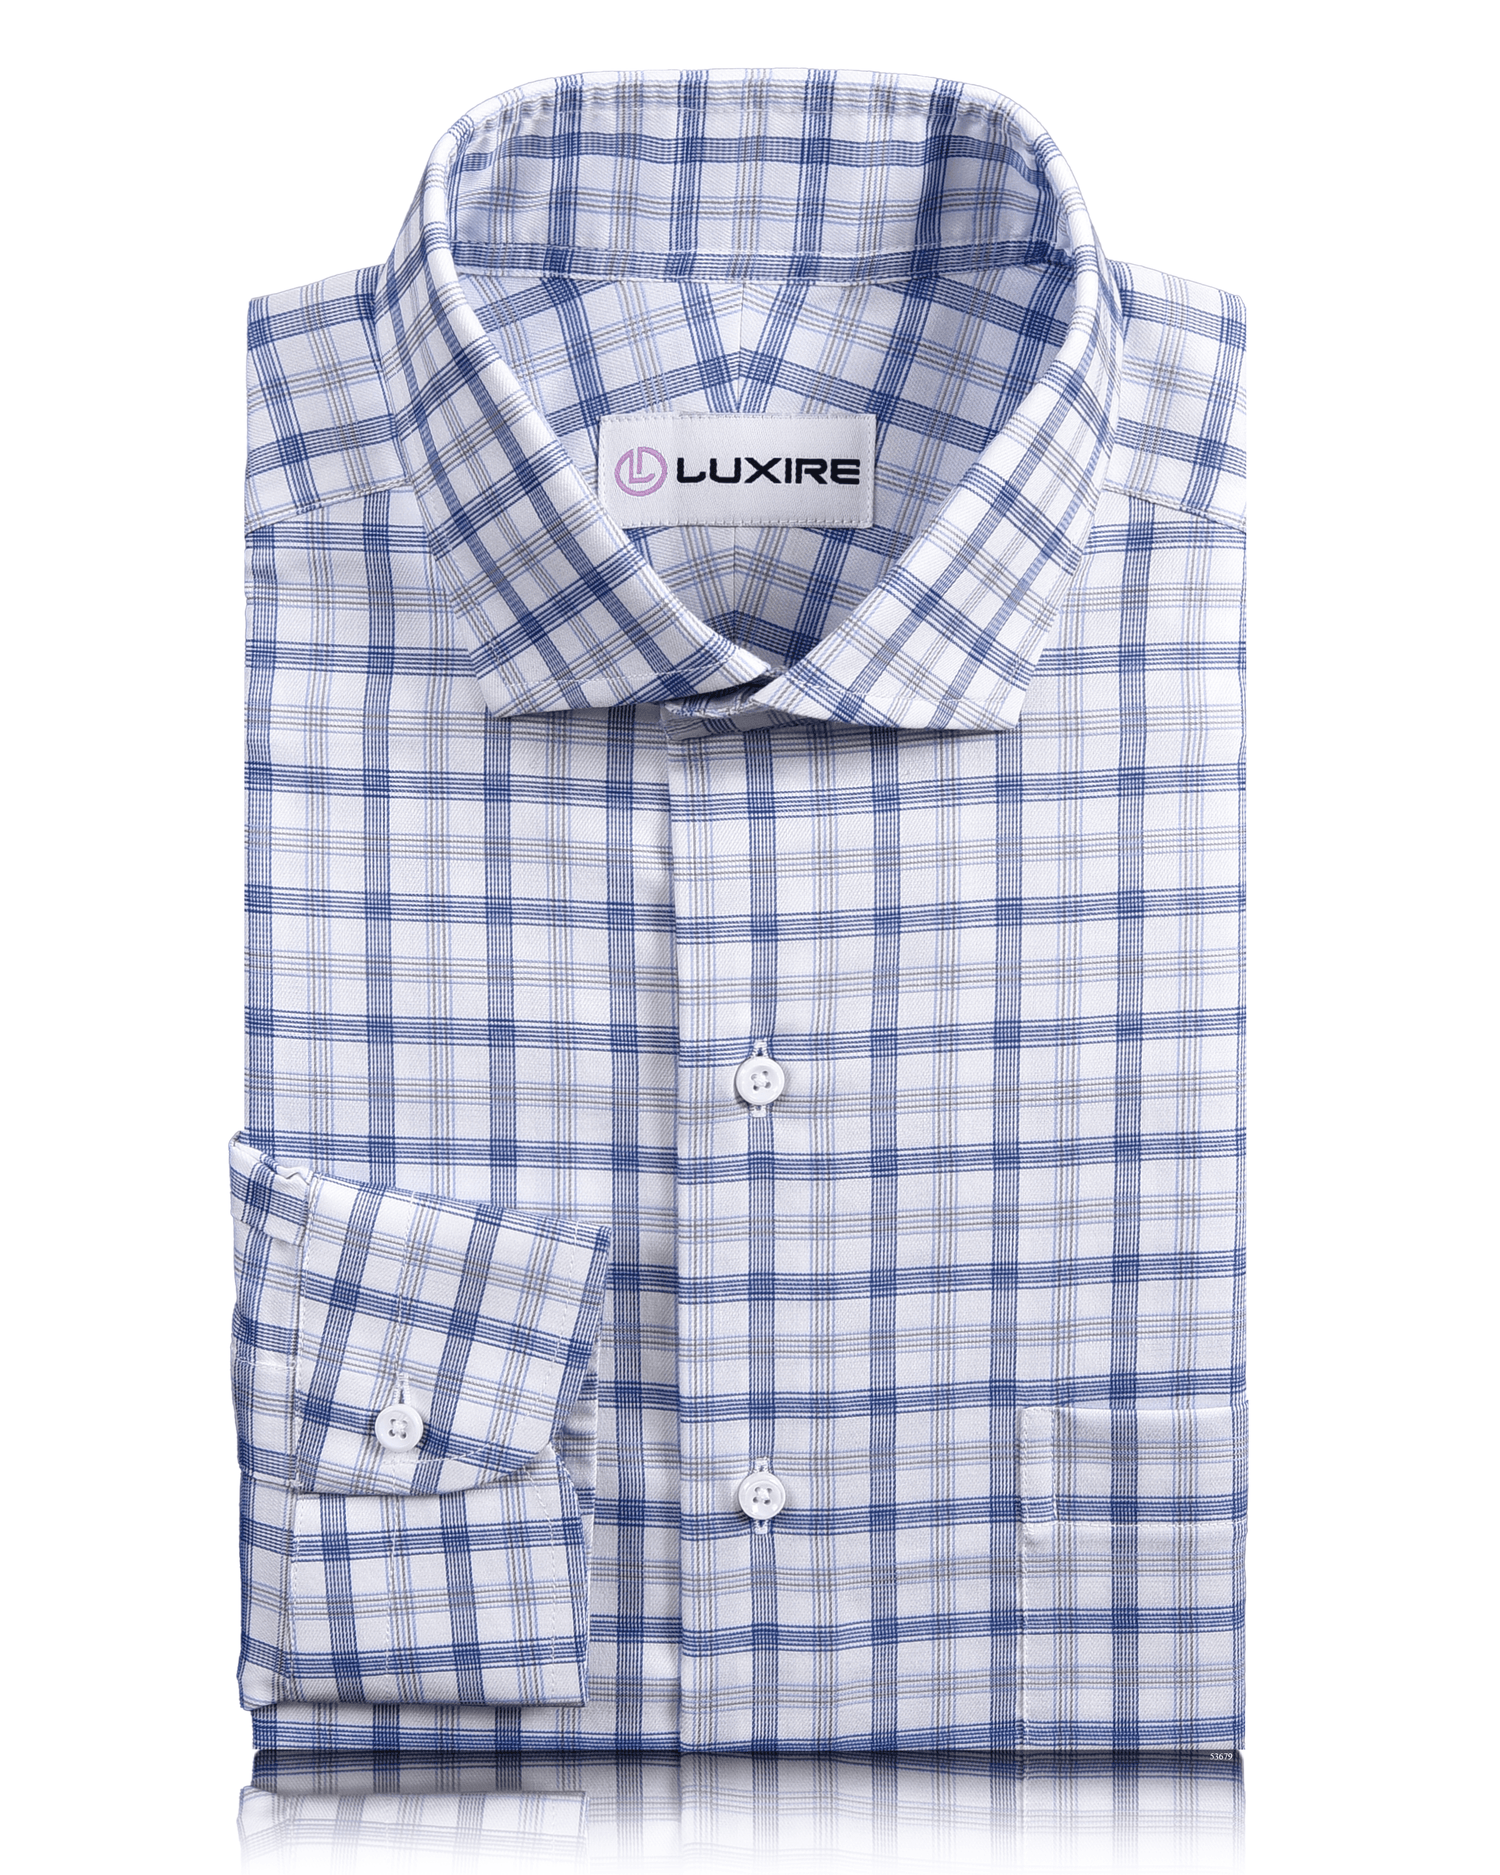 Front view of custom check shirts for men by Luxire in monti blue grey tattersall